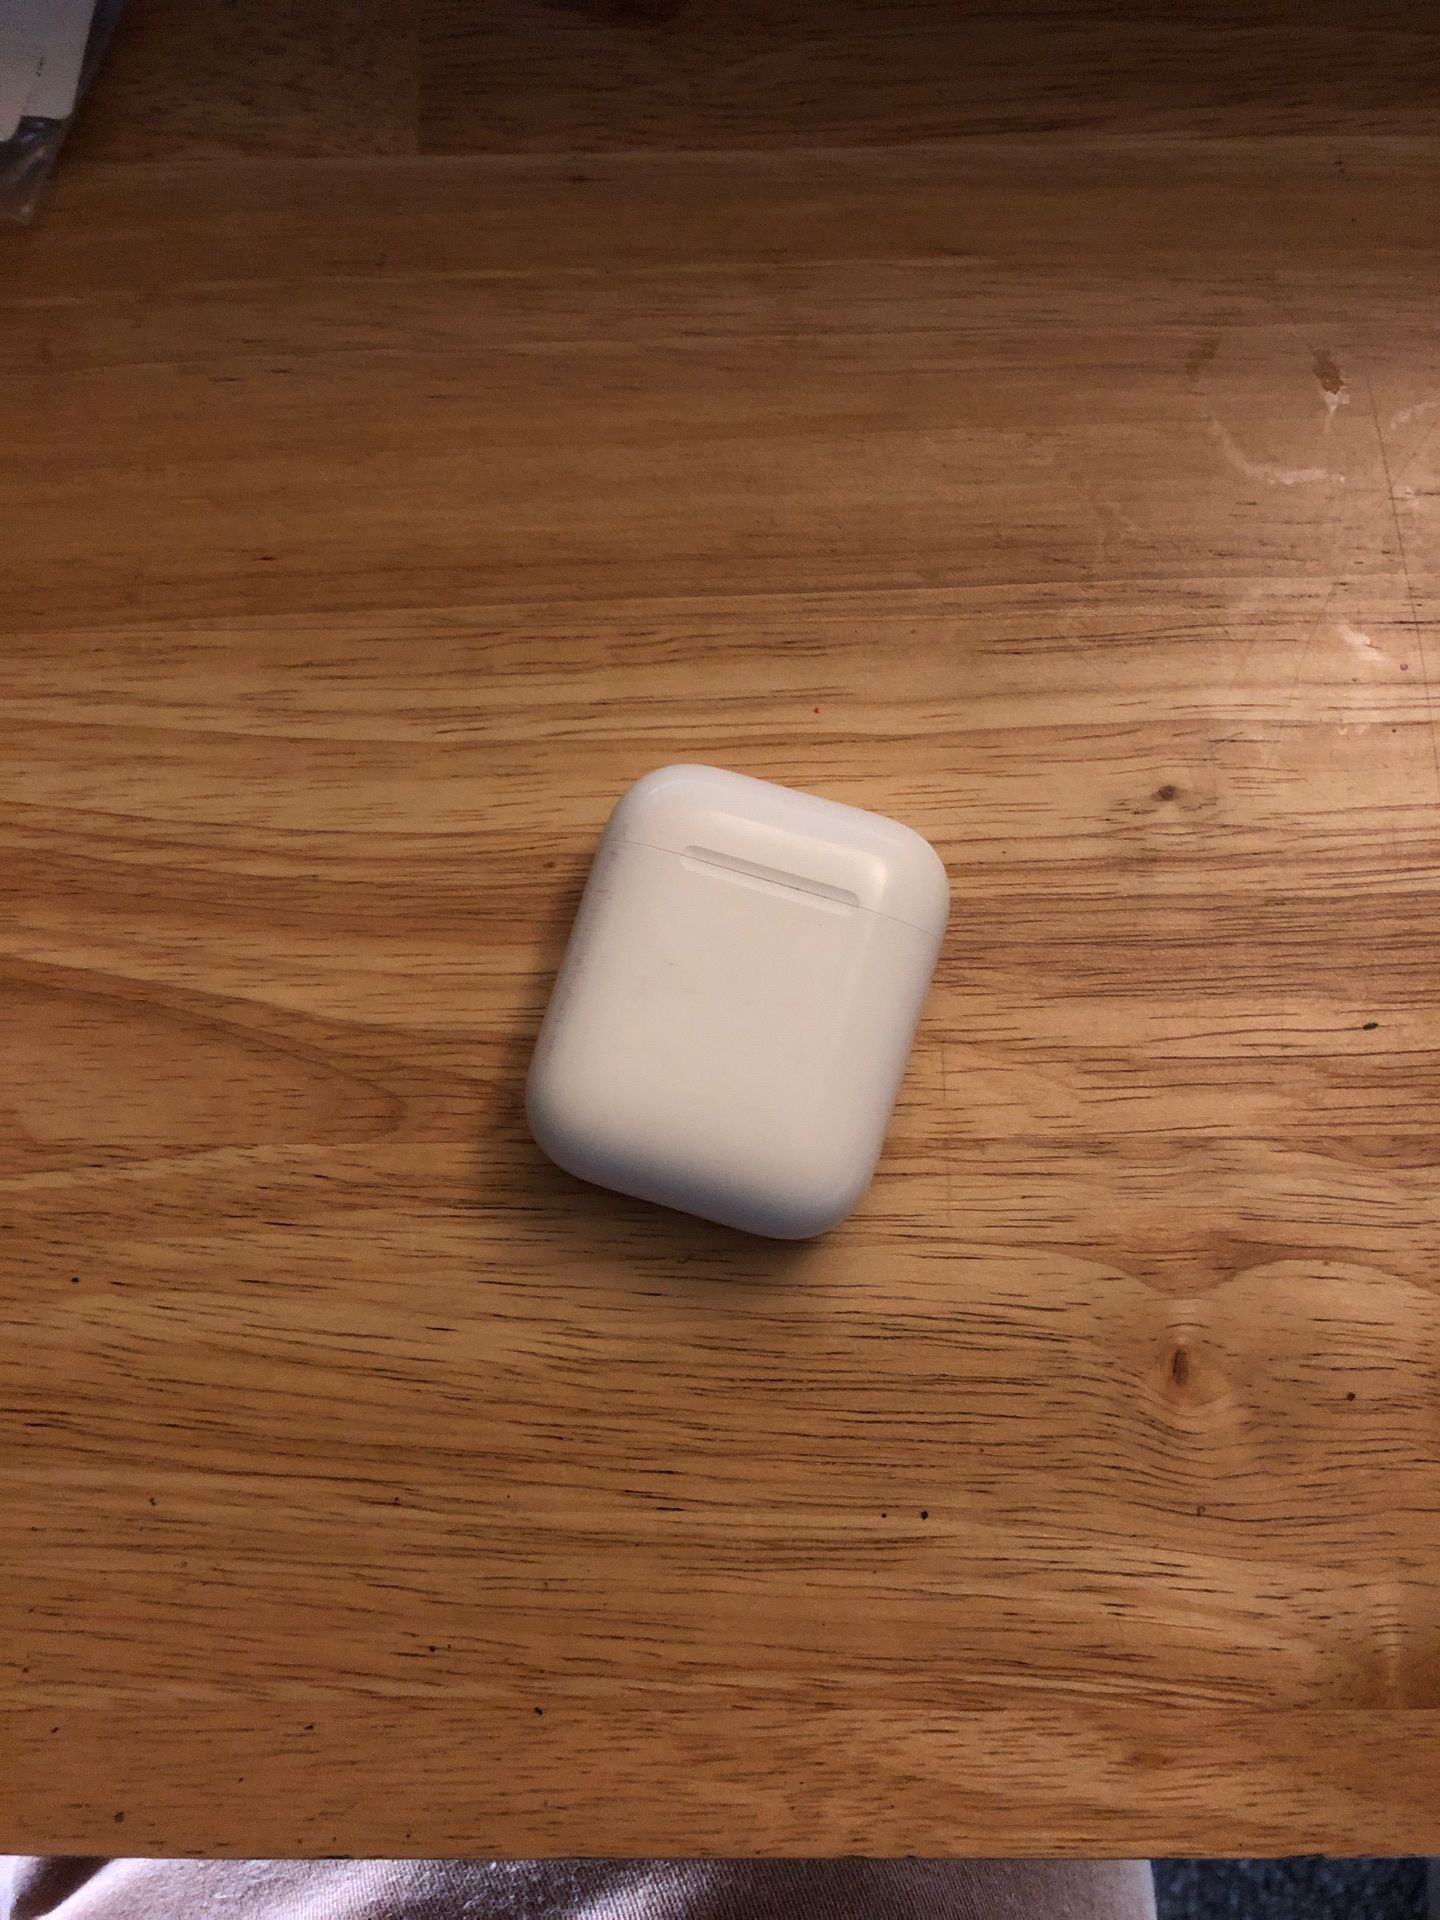 Apple Airpods A1602 case